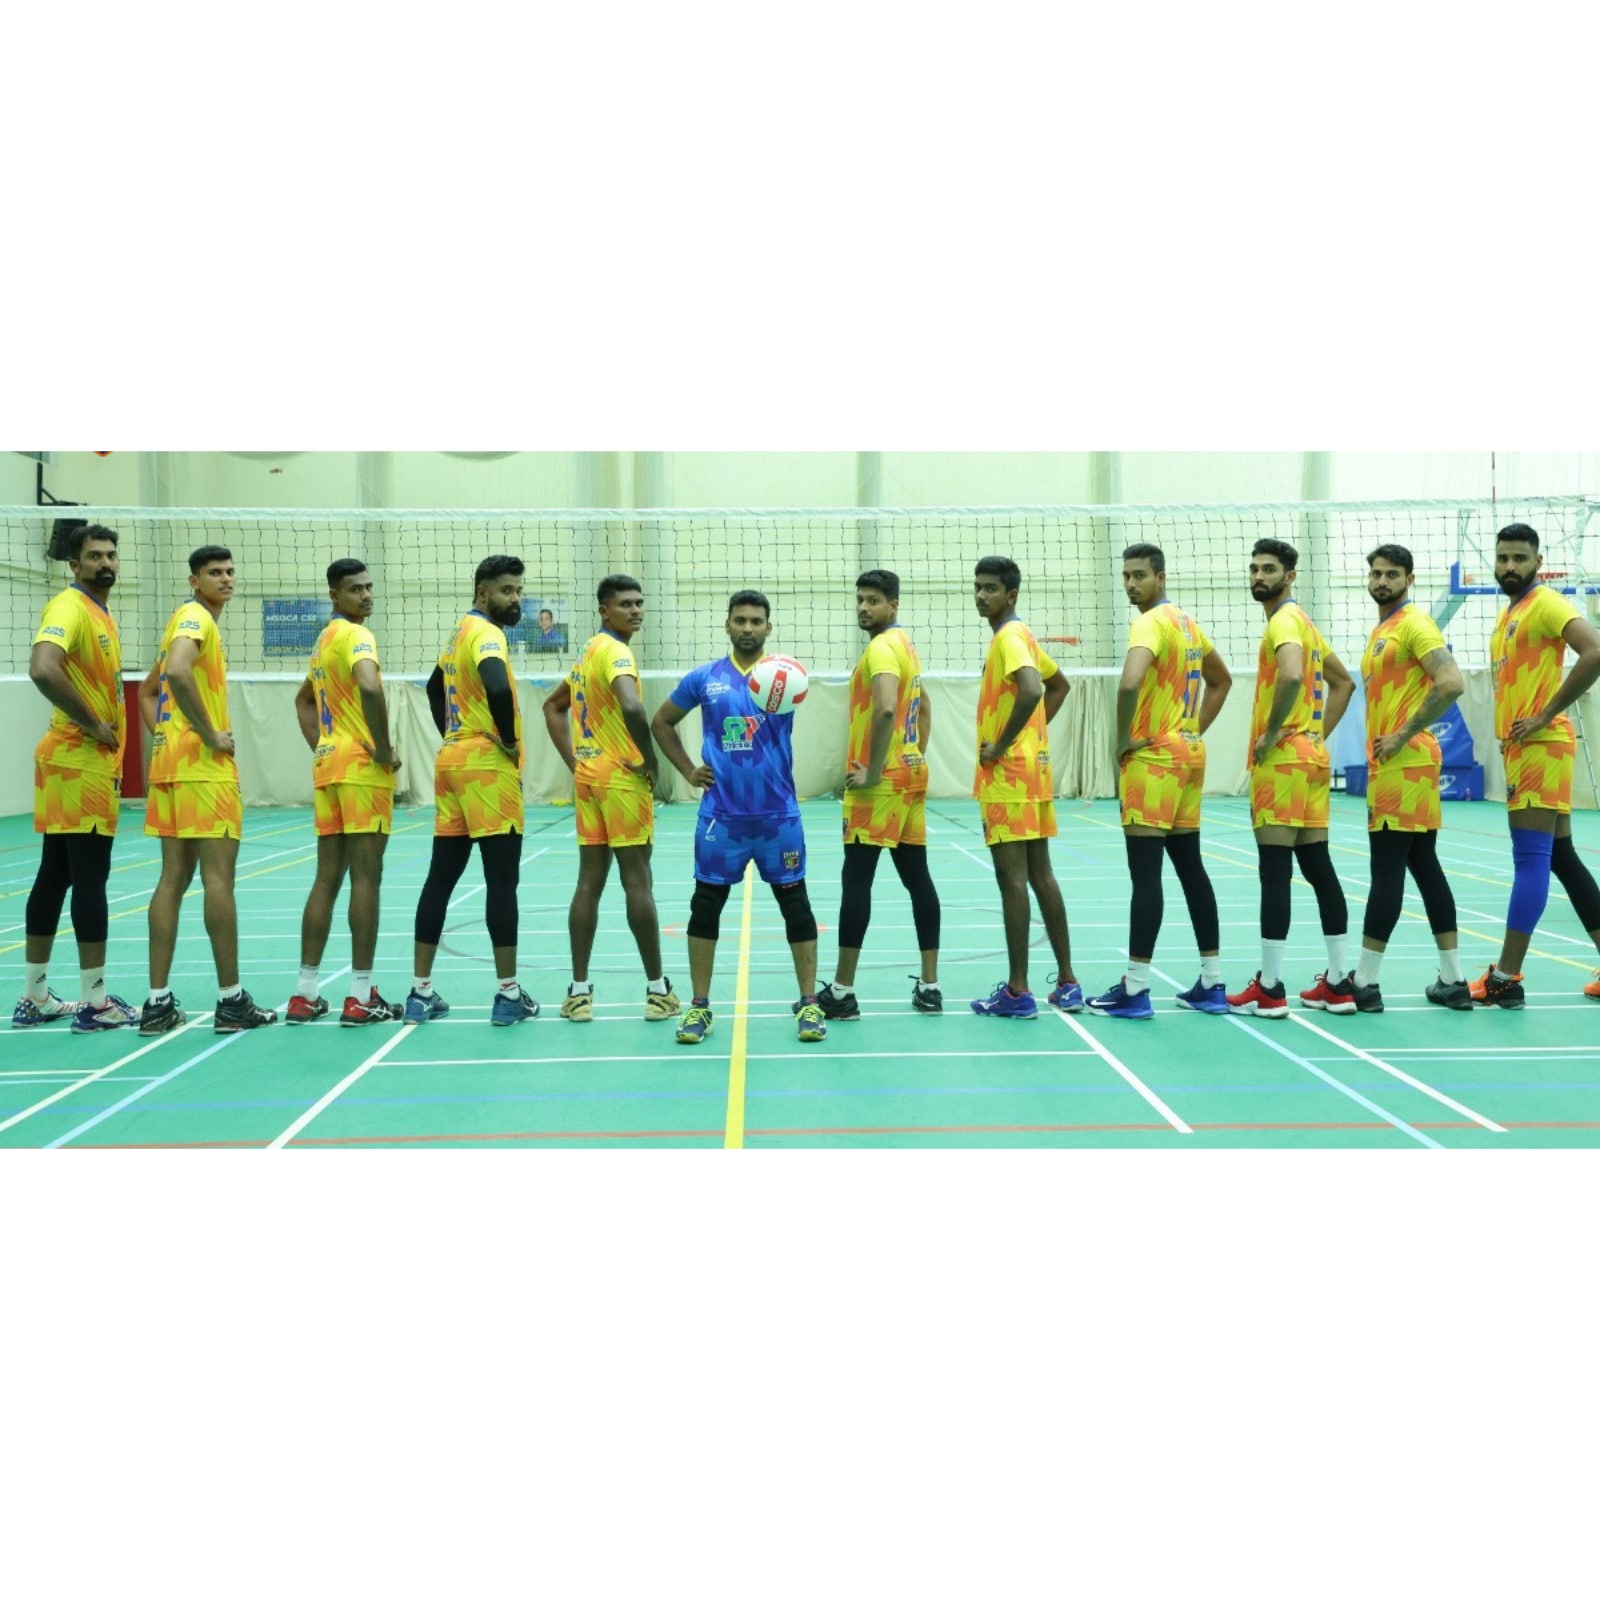 Prime Volleyball League is a Golden Opportunity for Me Chennai Blitzs Akhin GS